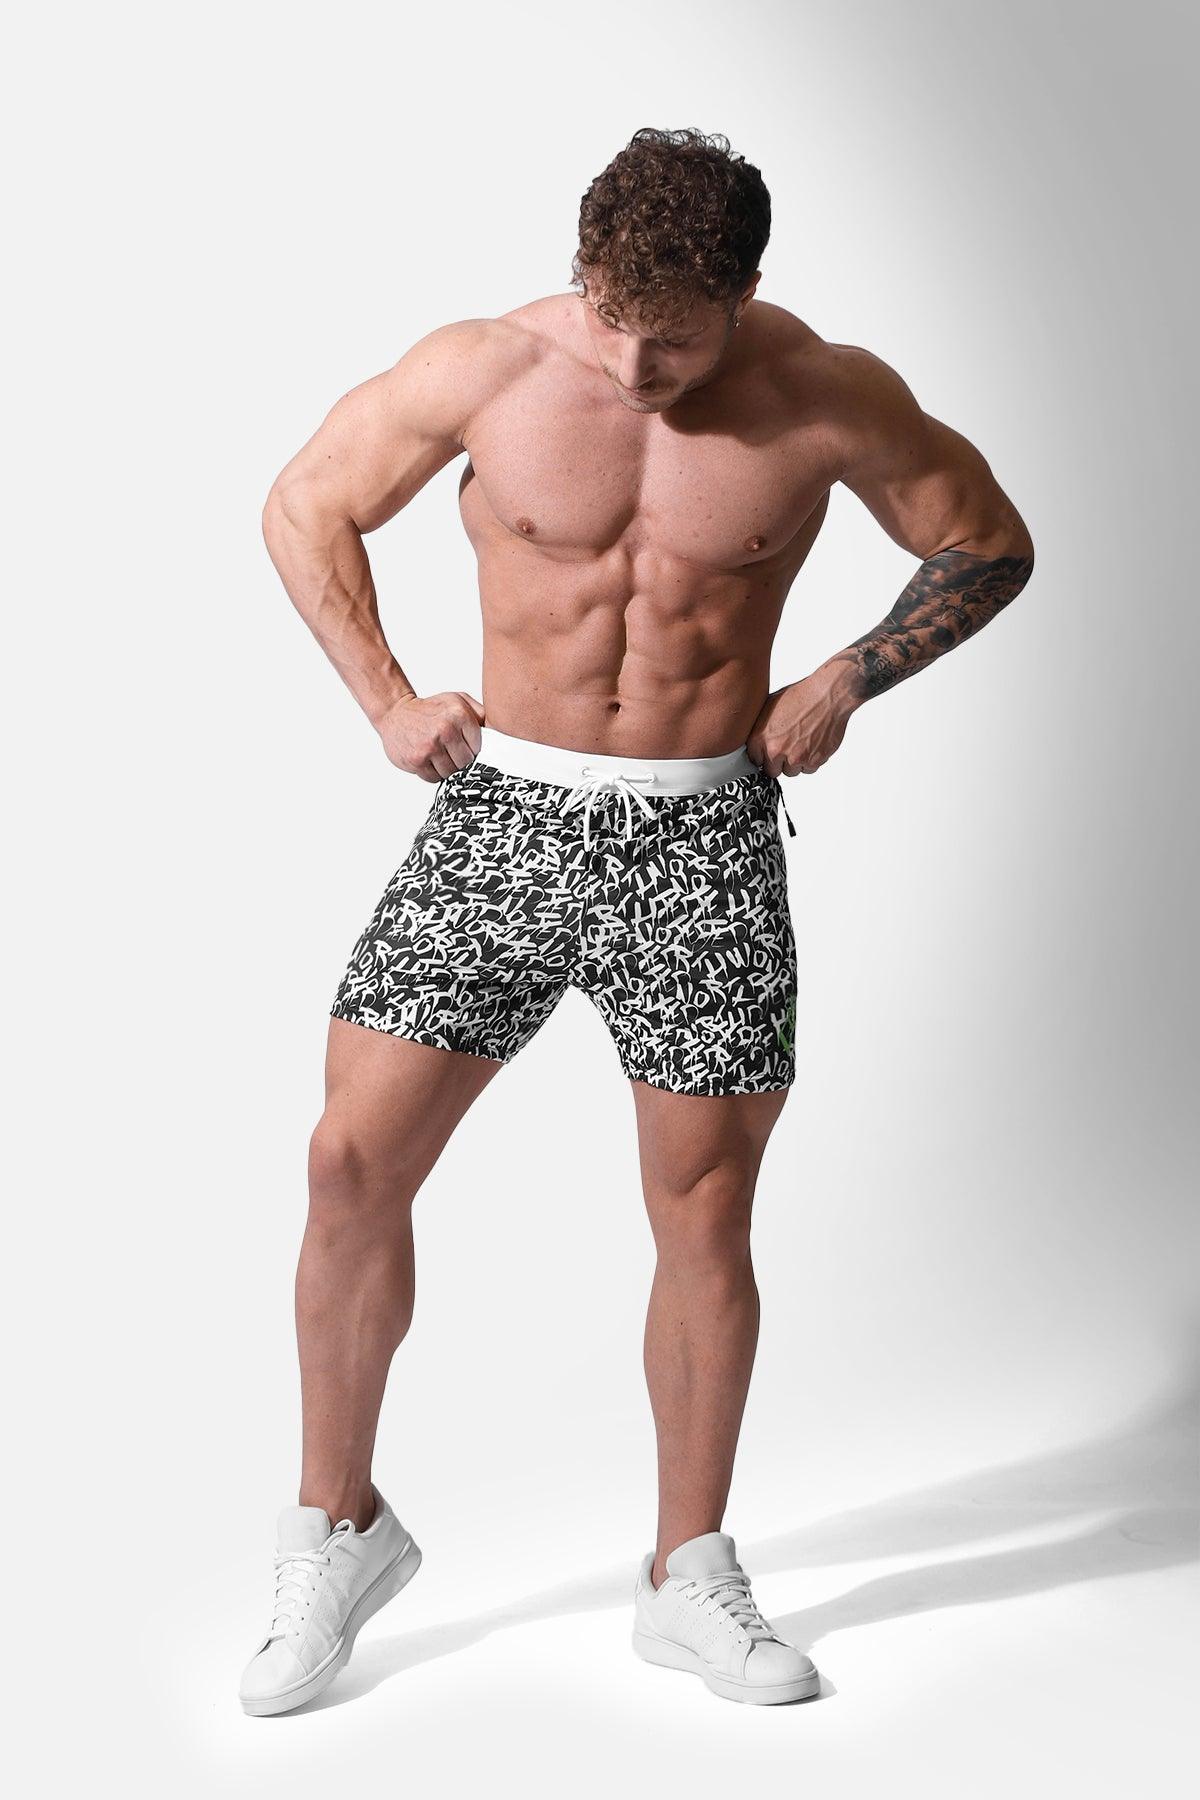 Jed North Men's Bodybuilding Contest Physique Posing Trunks Competition  Suit Shorts - Buy Online - 231076837